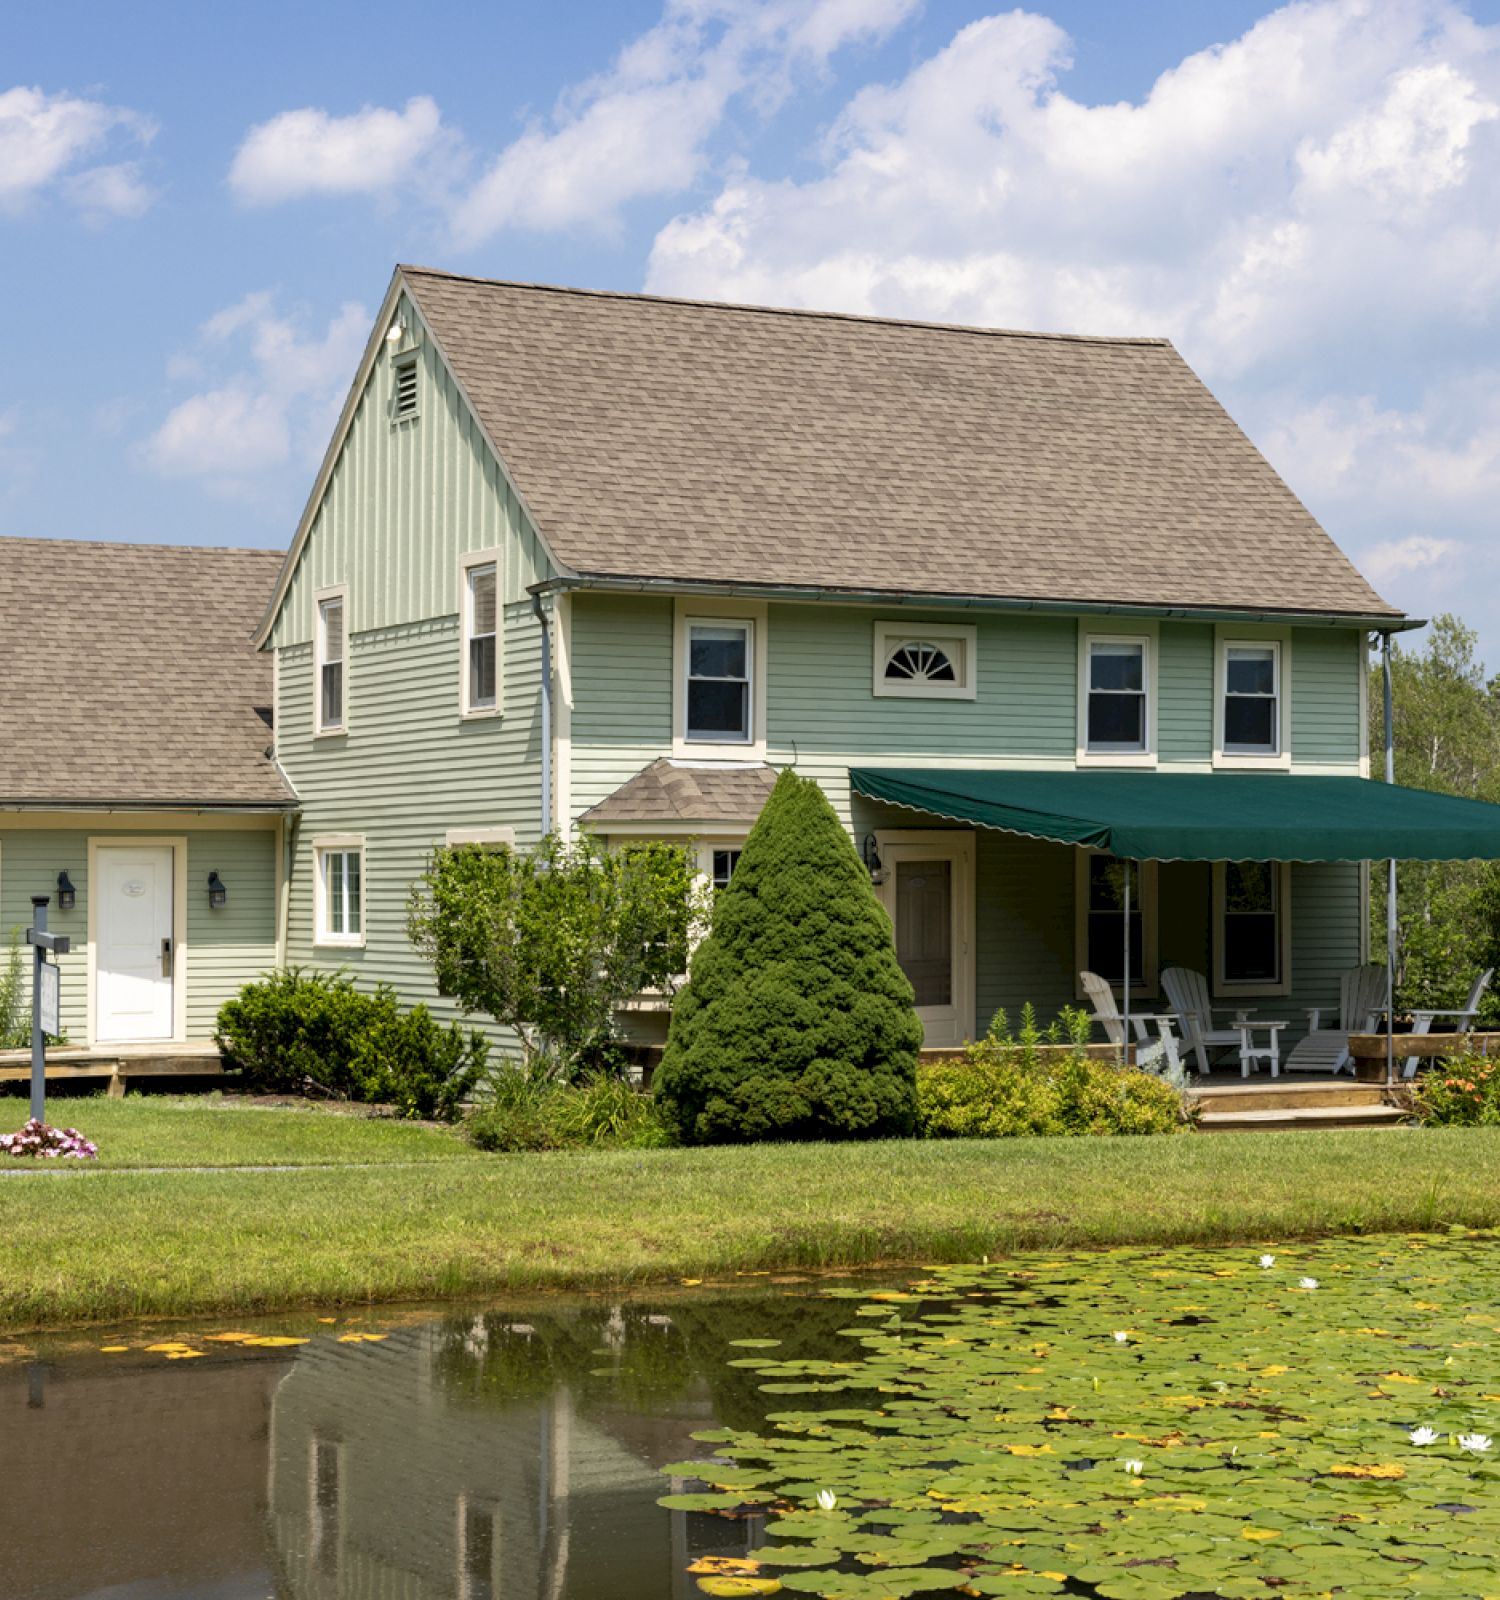 A two-story house with light green siding, a porch with green awning, and a pond with lily pads in the foreground is shown.